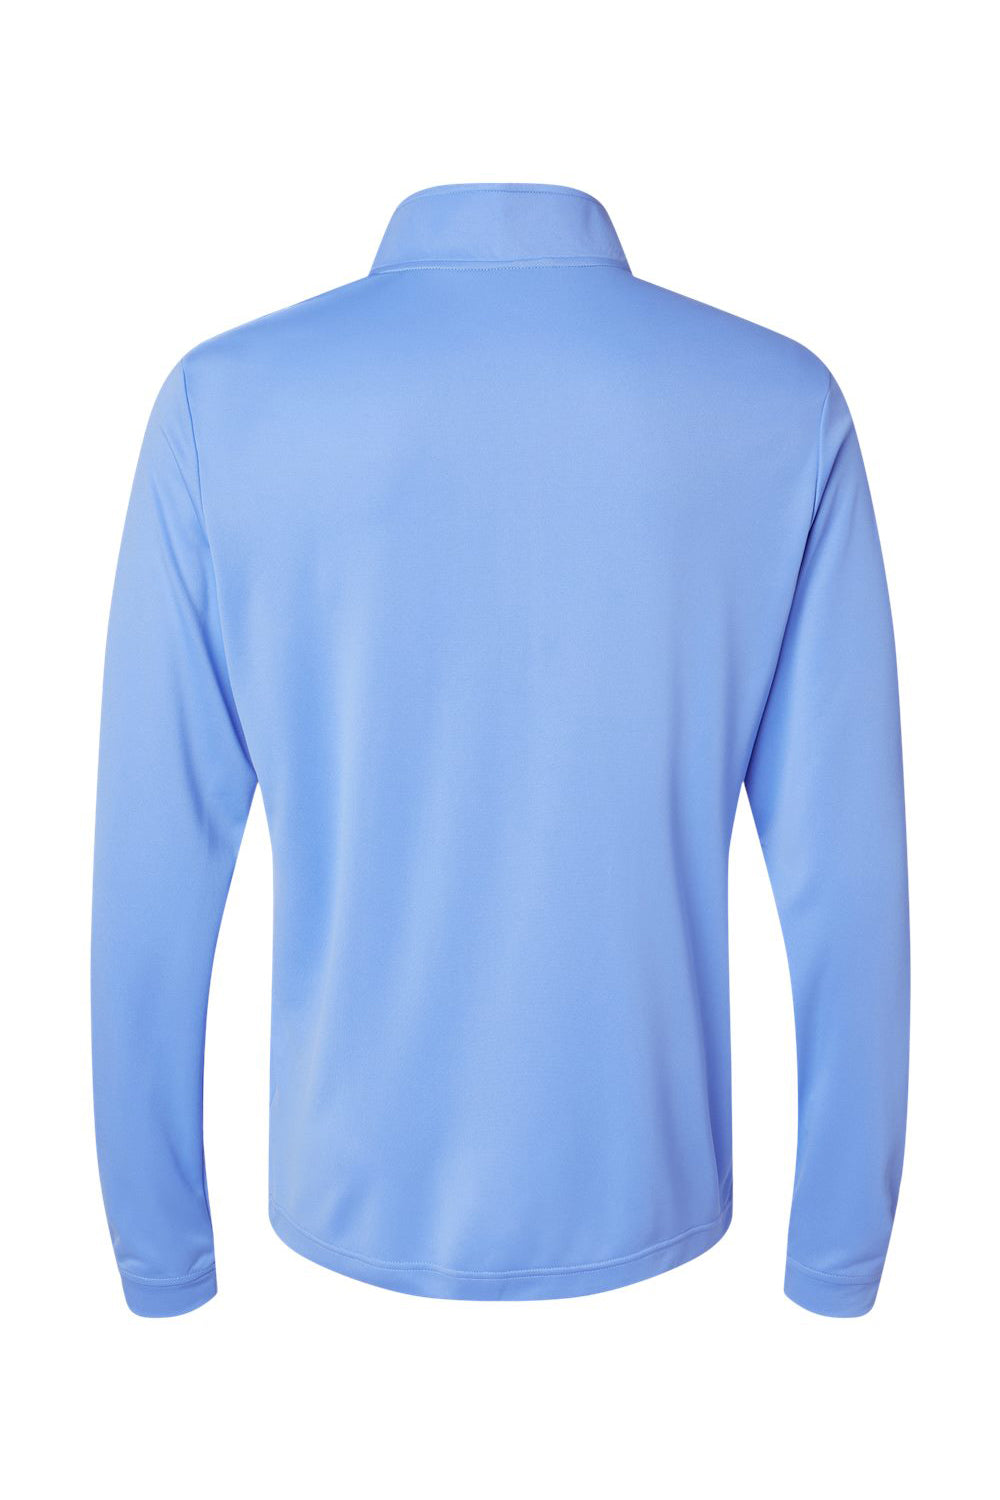 Adidas A401 Mens 1/4 Zip Pullover Blue Fusion Flat Back